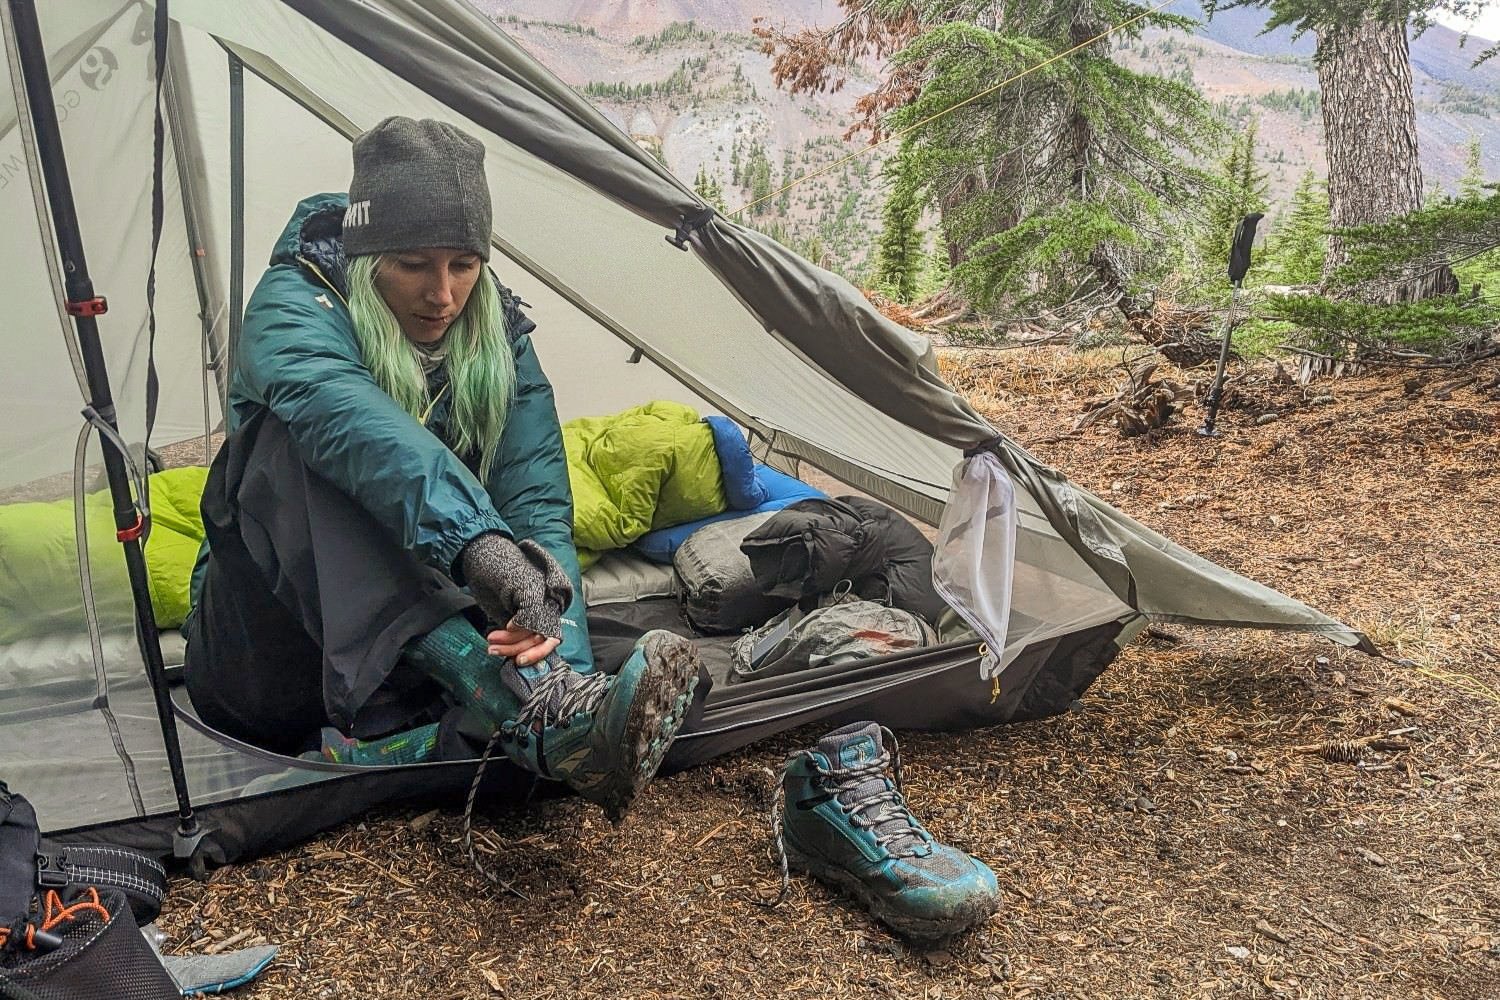 A backpacker putting on her shoes in the door of her backpacking tent.